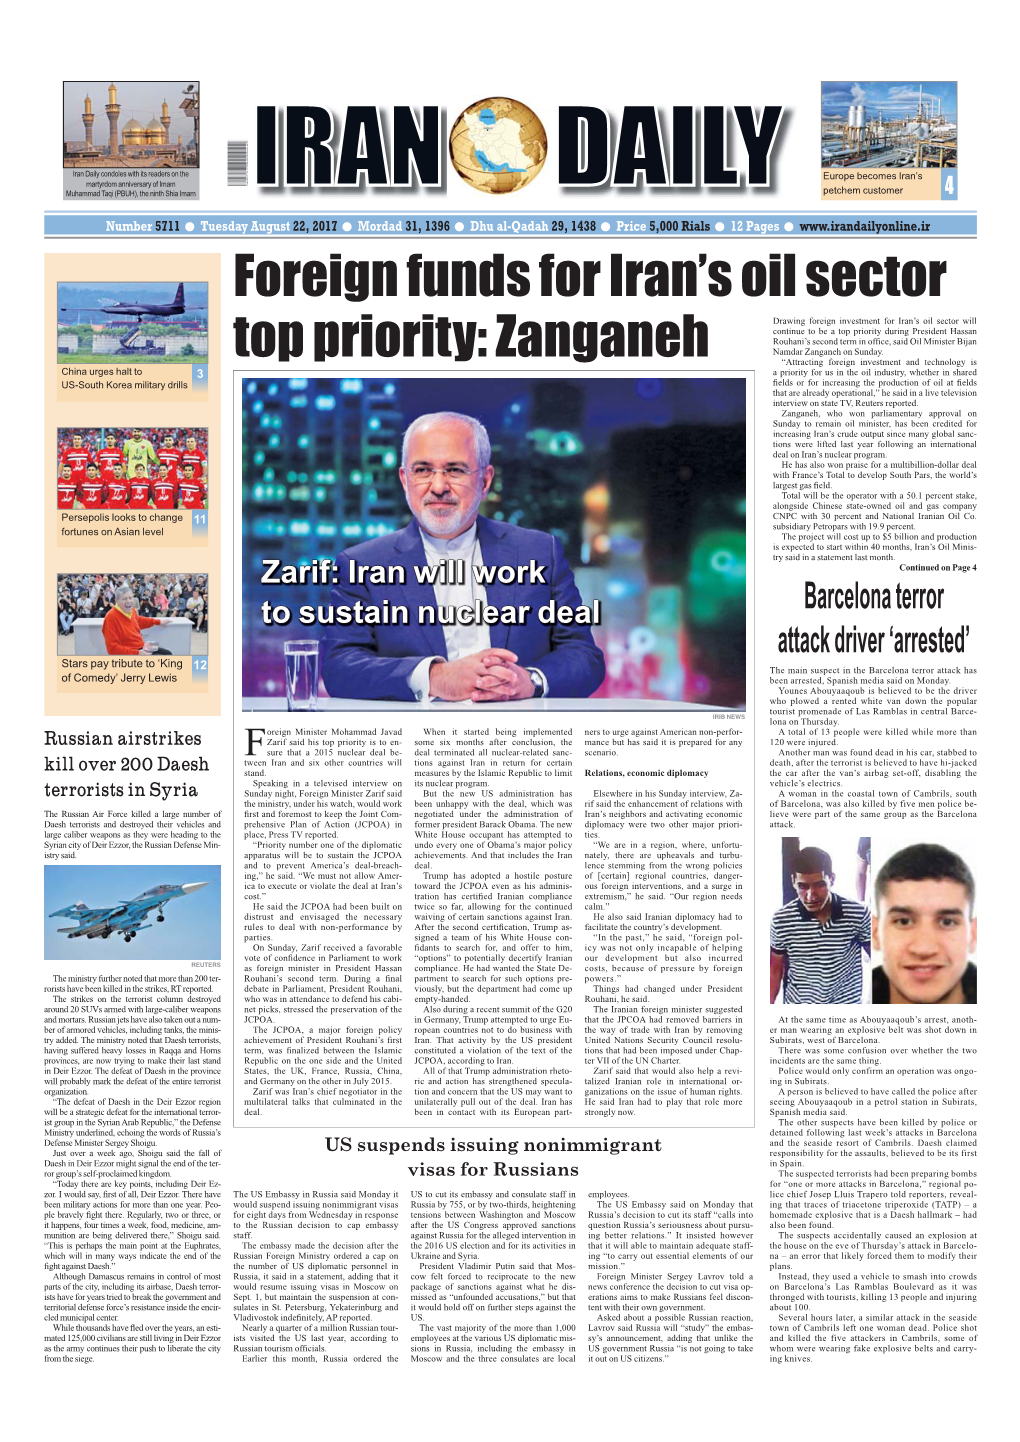 Foreign Funds for Iran's Oil Sector Top Priority: Zanganeh